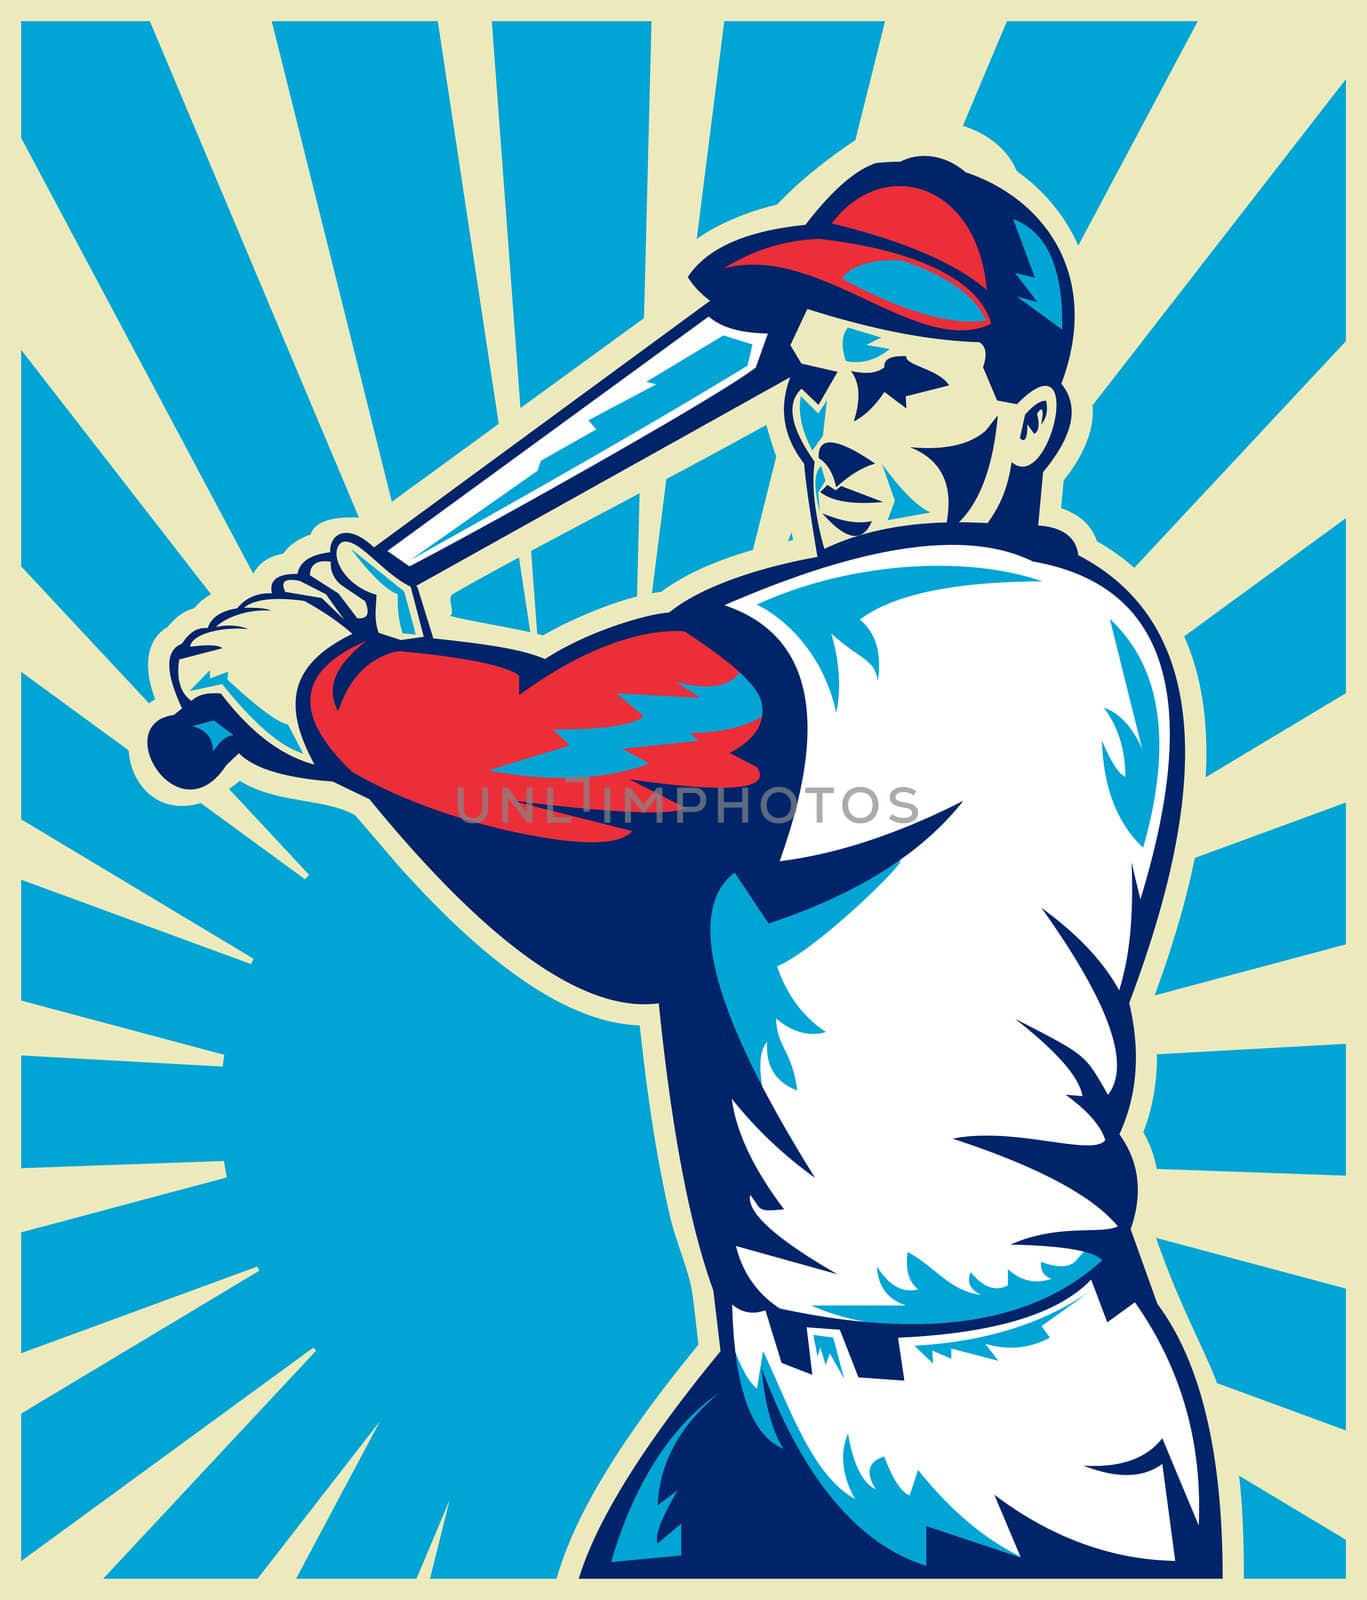 illustration of a Baseball player holding bat with sunburst in background set inside circle done in retro woodcut style.